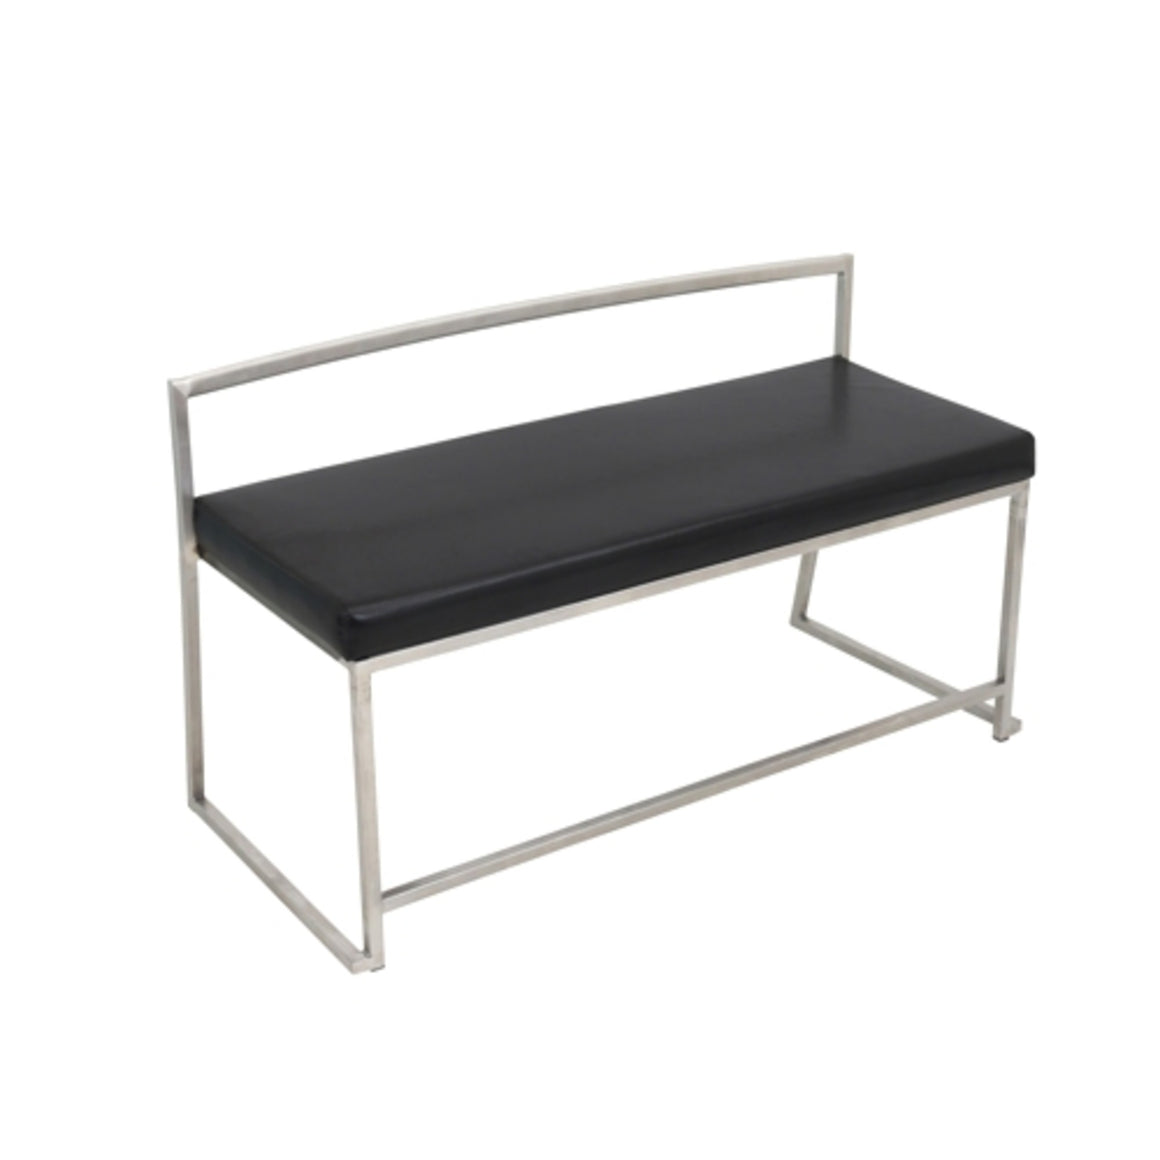 Fuji Contemporary Dining / Entryway Bench in Black Faux Leather by LumiSource